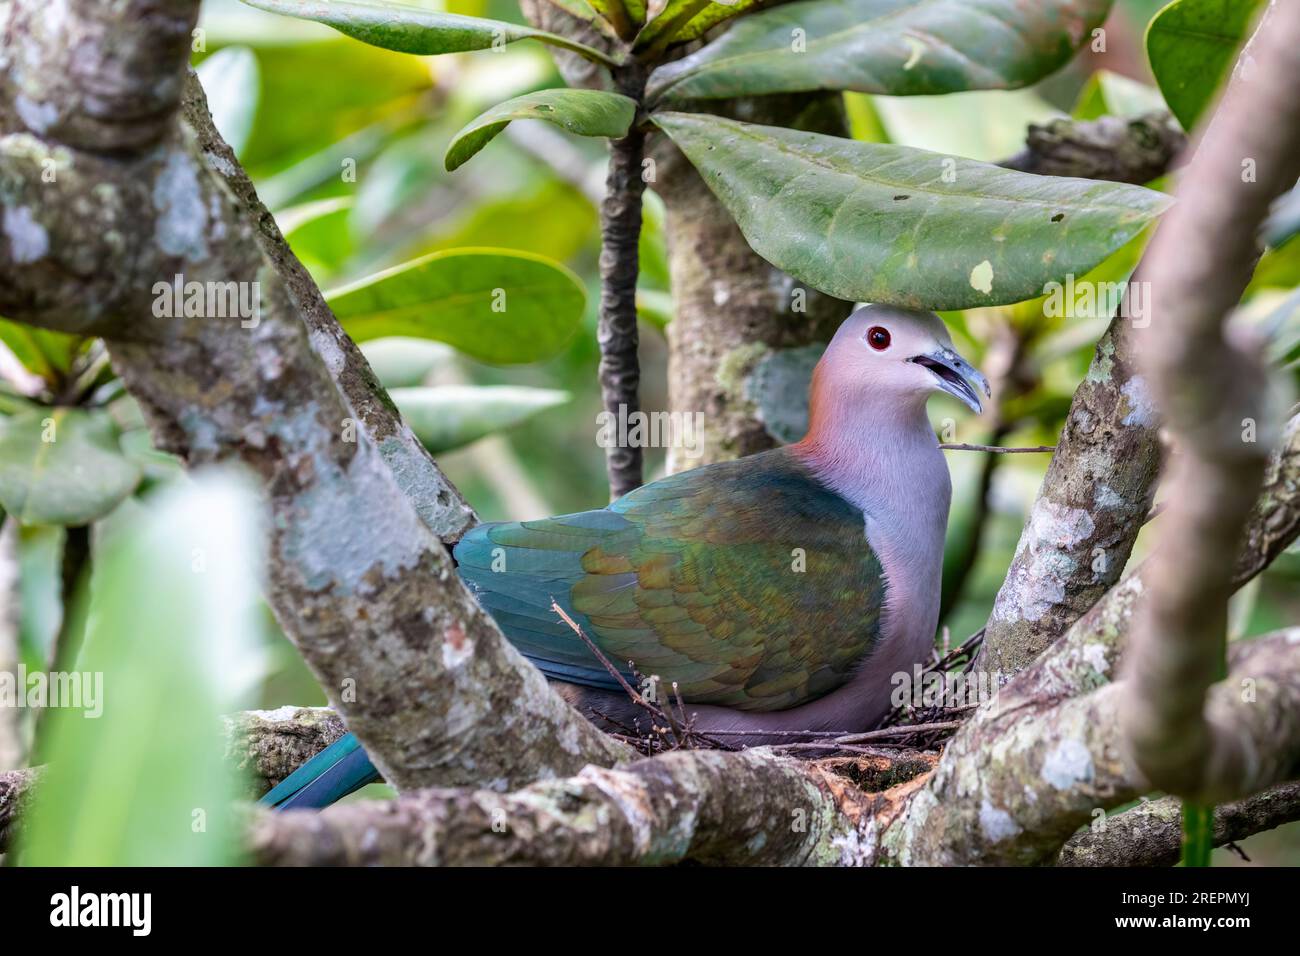 The chestnut-naped imperial pigeon (Ducula aenea paulina) is resting in the nest. It is subspecies of Green imperial pigeon from Celebes Indonesia. Stock Photo